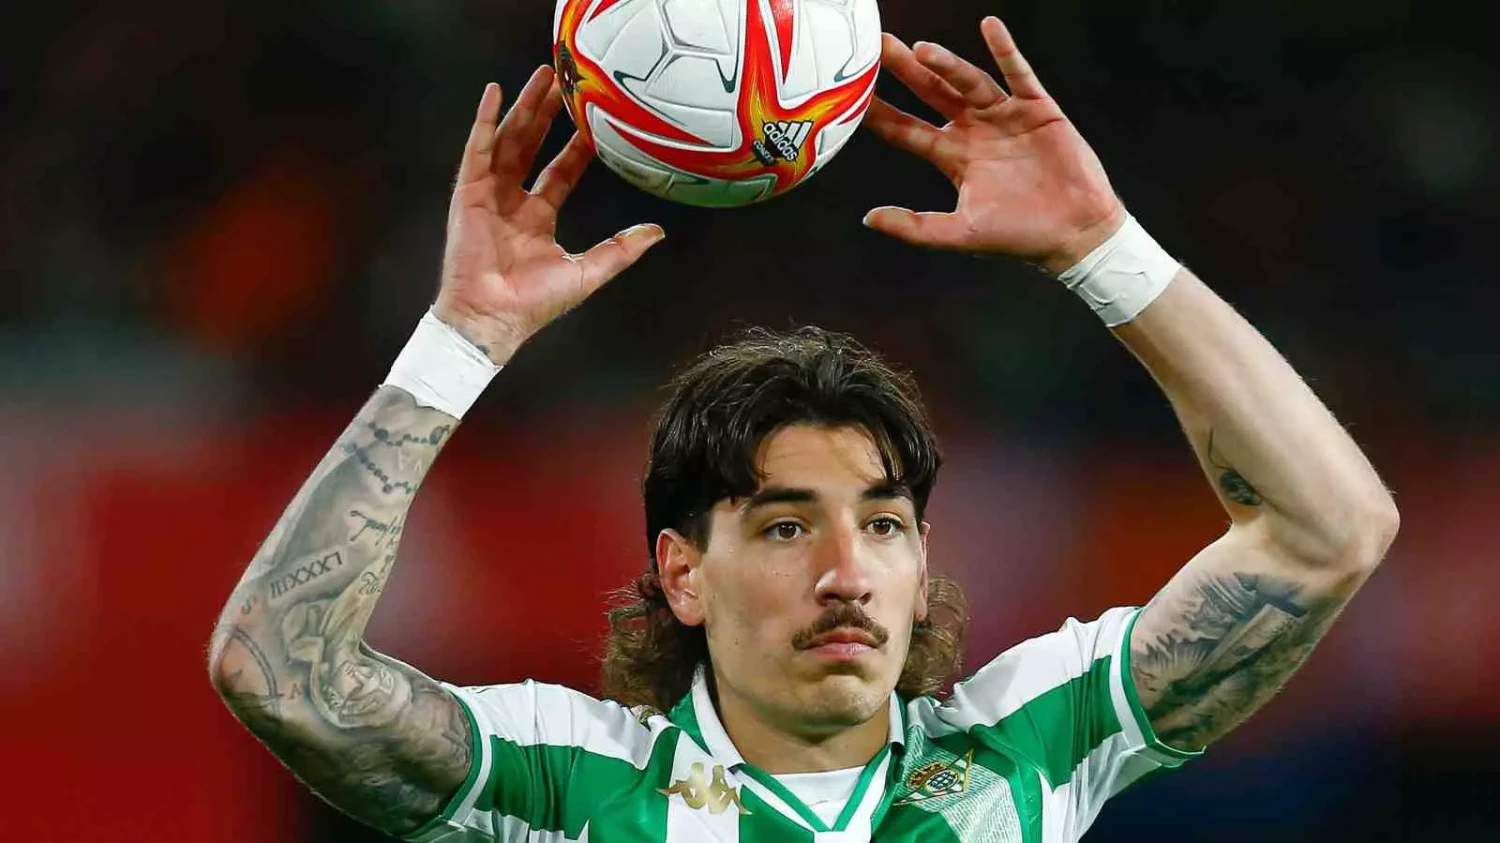 Barcelona re-sign Hector Bellerin after Arsenal contract termination - ESPN